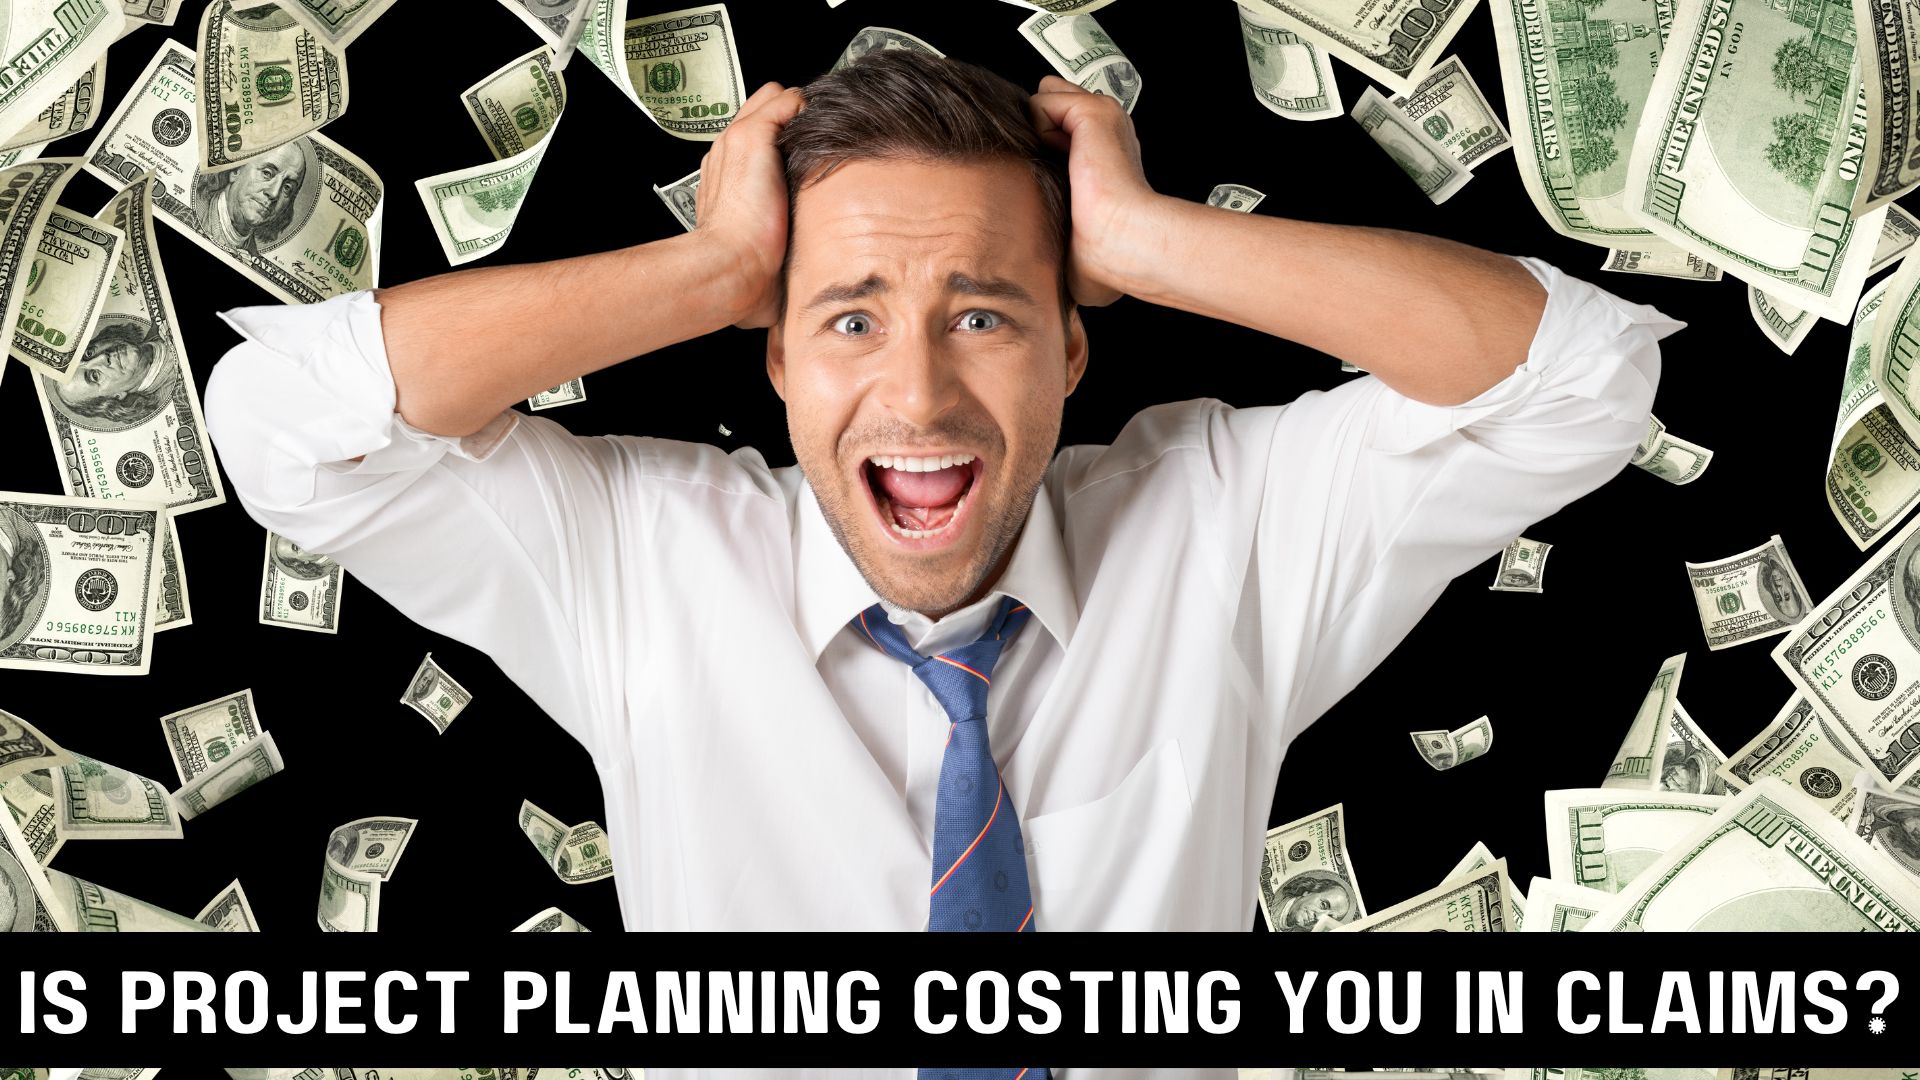 Is lack of project planning skills costing you money in claims?